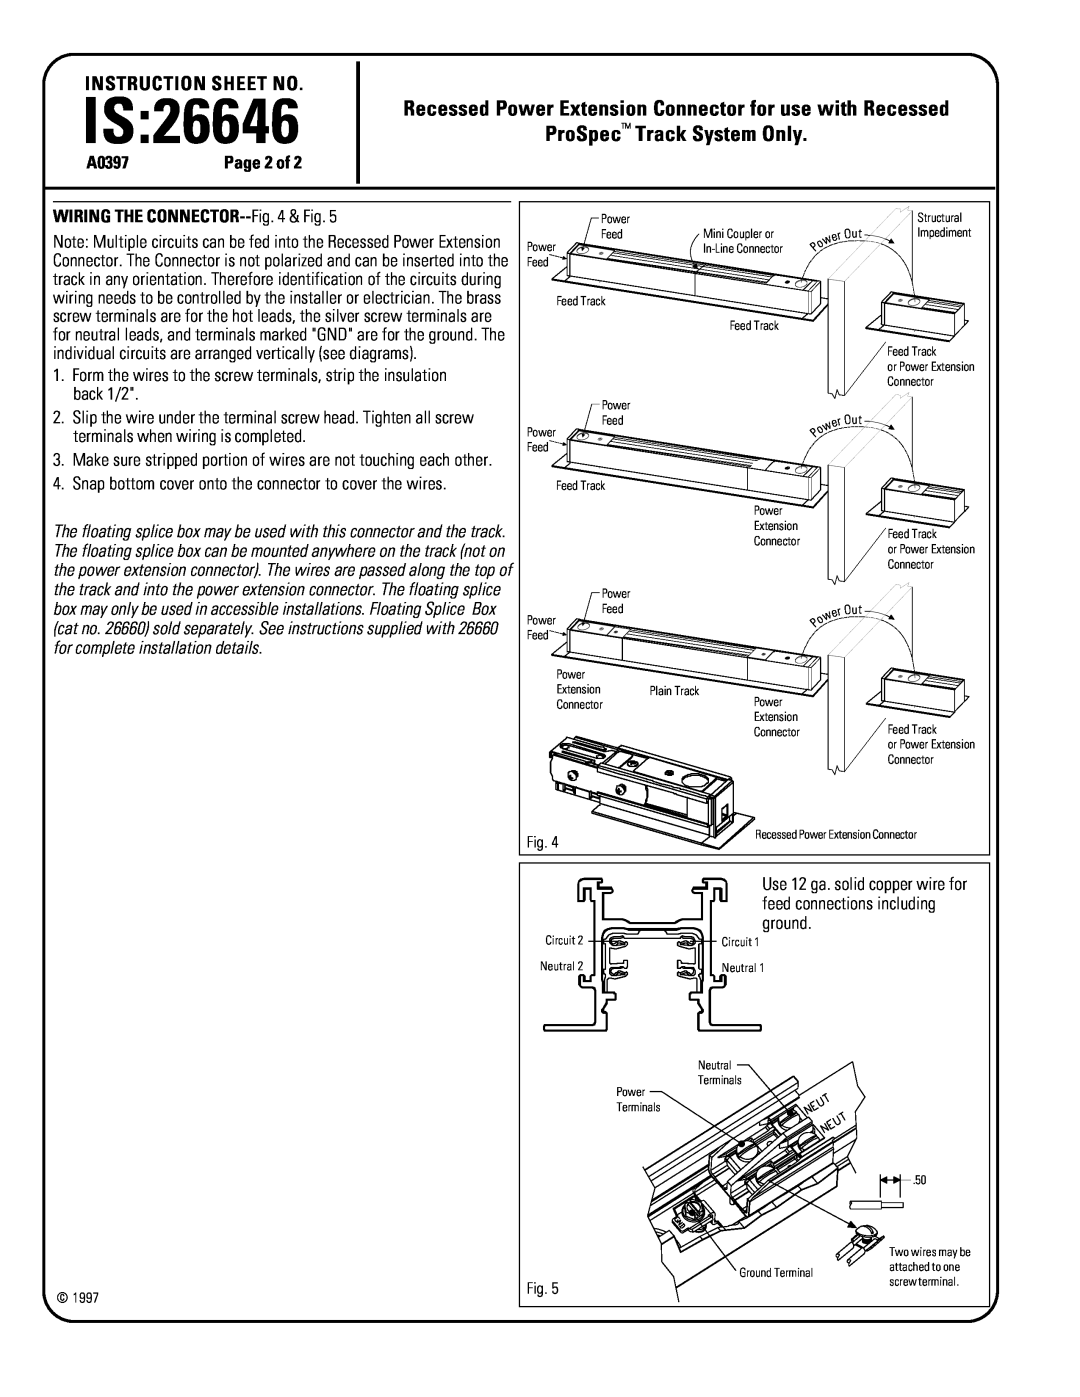 Lightolier 26646 instruction sheet ProSpec Track System Only, Is, Instruction Sheet No, A0397, WIRING THE CONNECTOR-- & Fig 